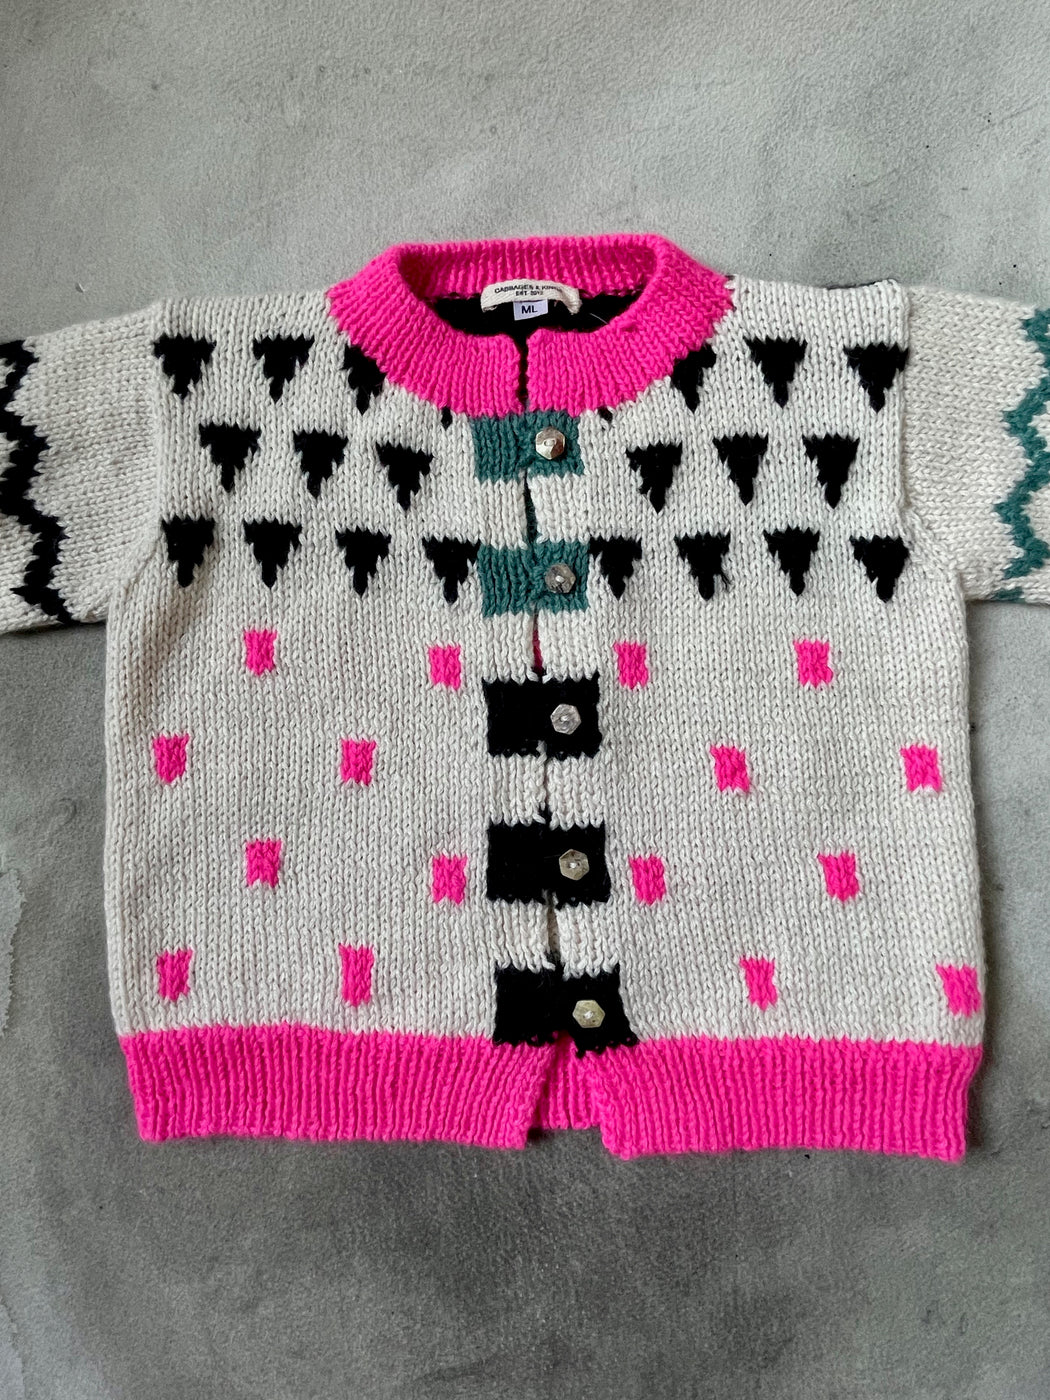 Cabbages & Kings "Museum" Sweater (3-4 years)